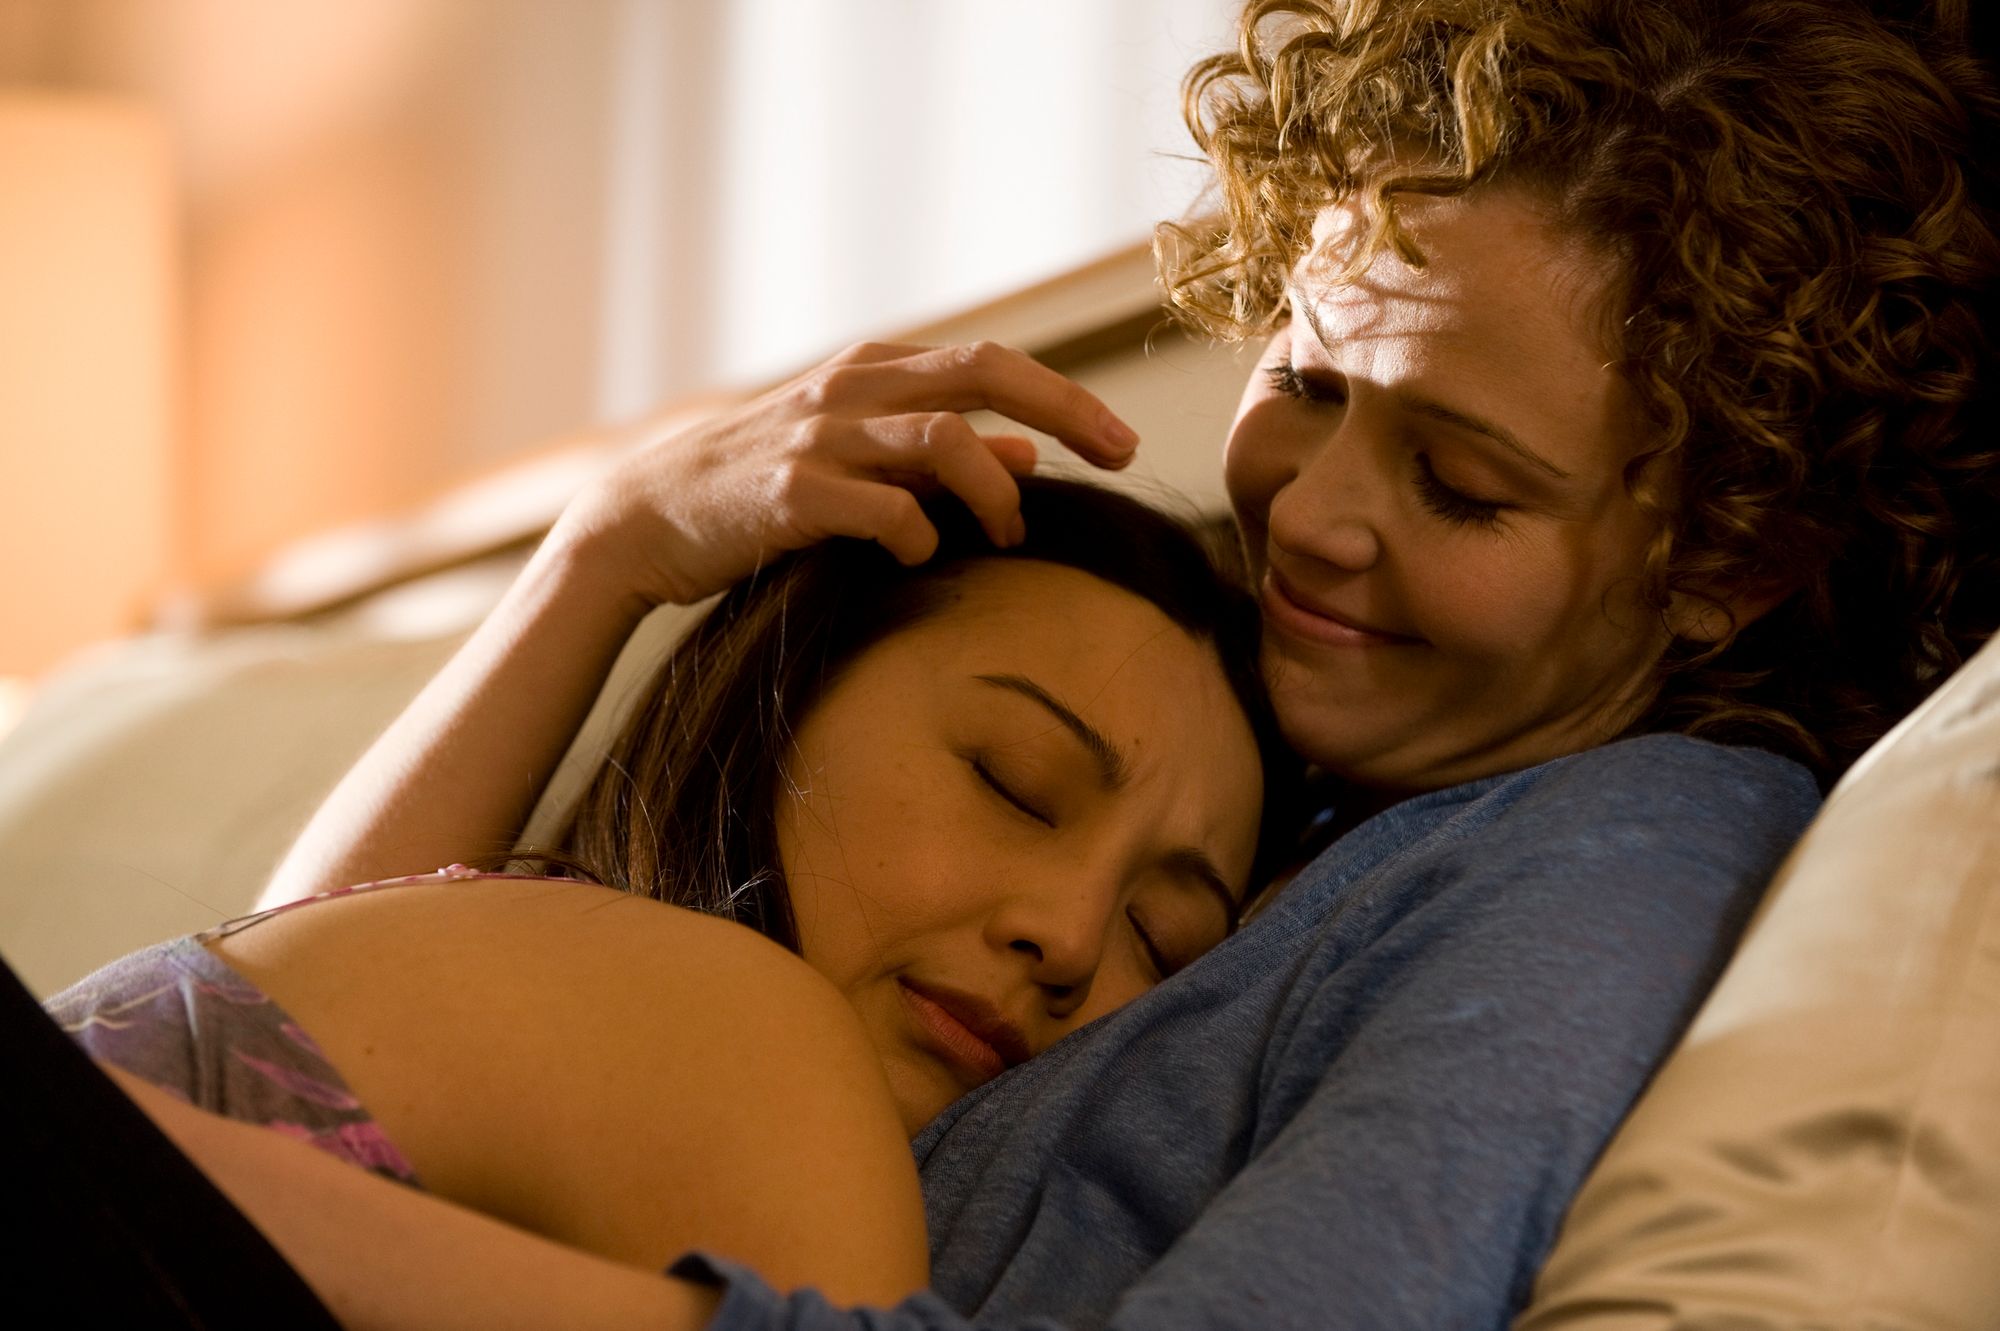 Camile Wray (Ming-Na Wen) rests her head on Sharon Walker (Reiko Aylesworth)’s chest.